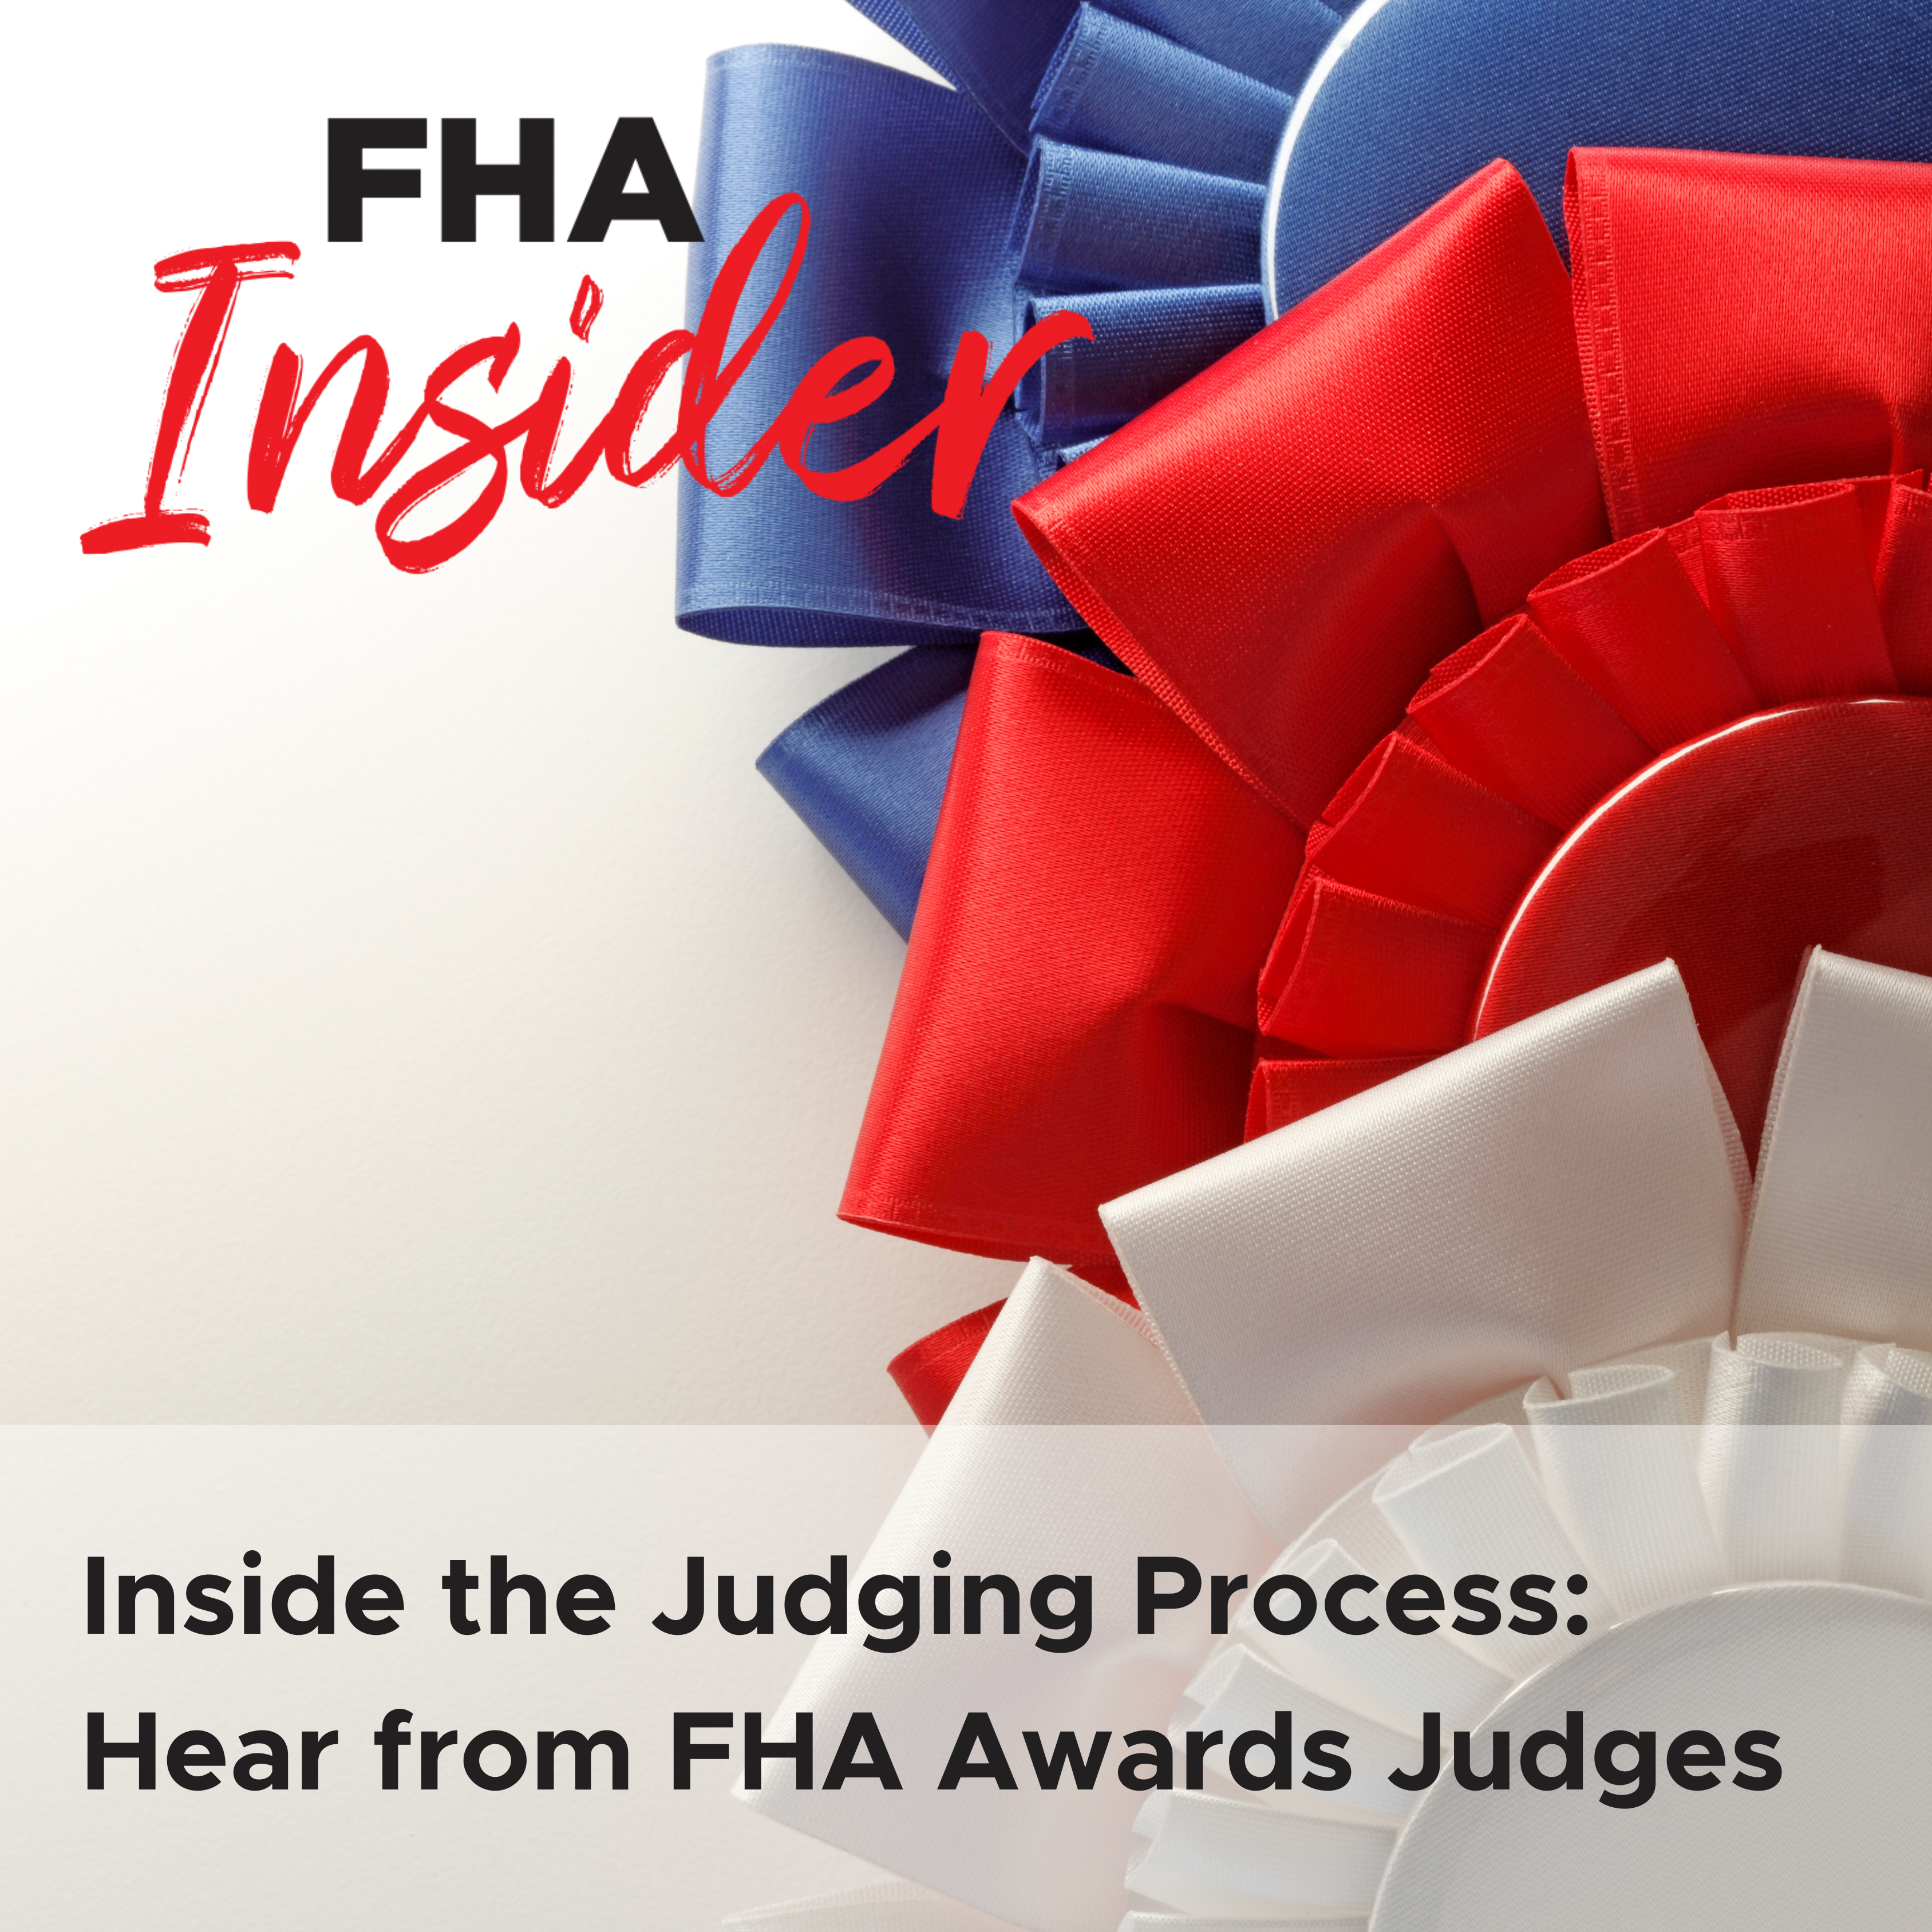 Inside the Judging Process: Hear from the FHA Awards Judges